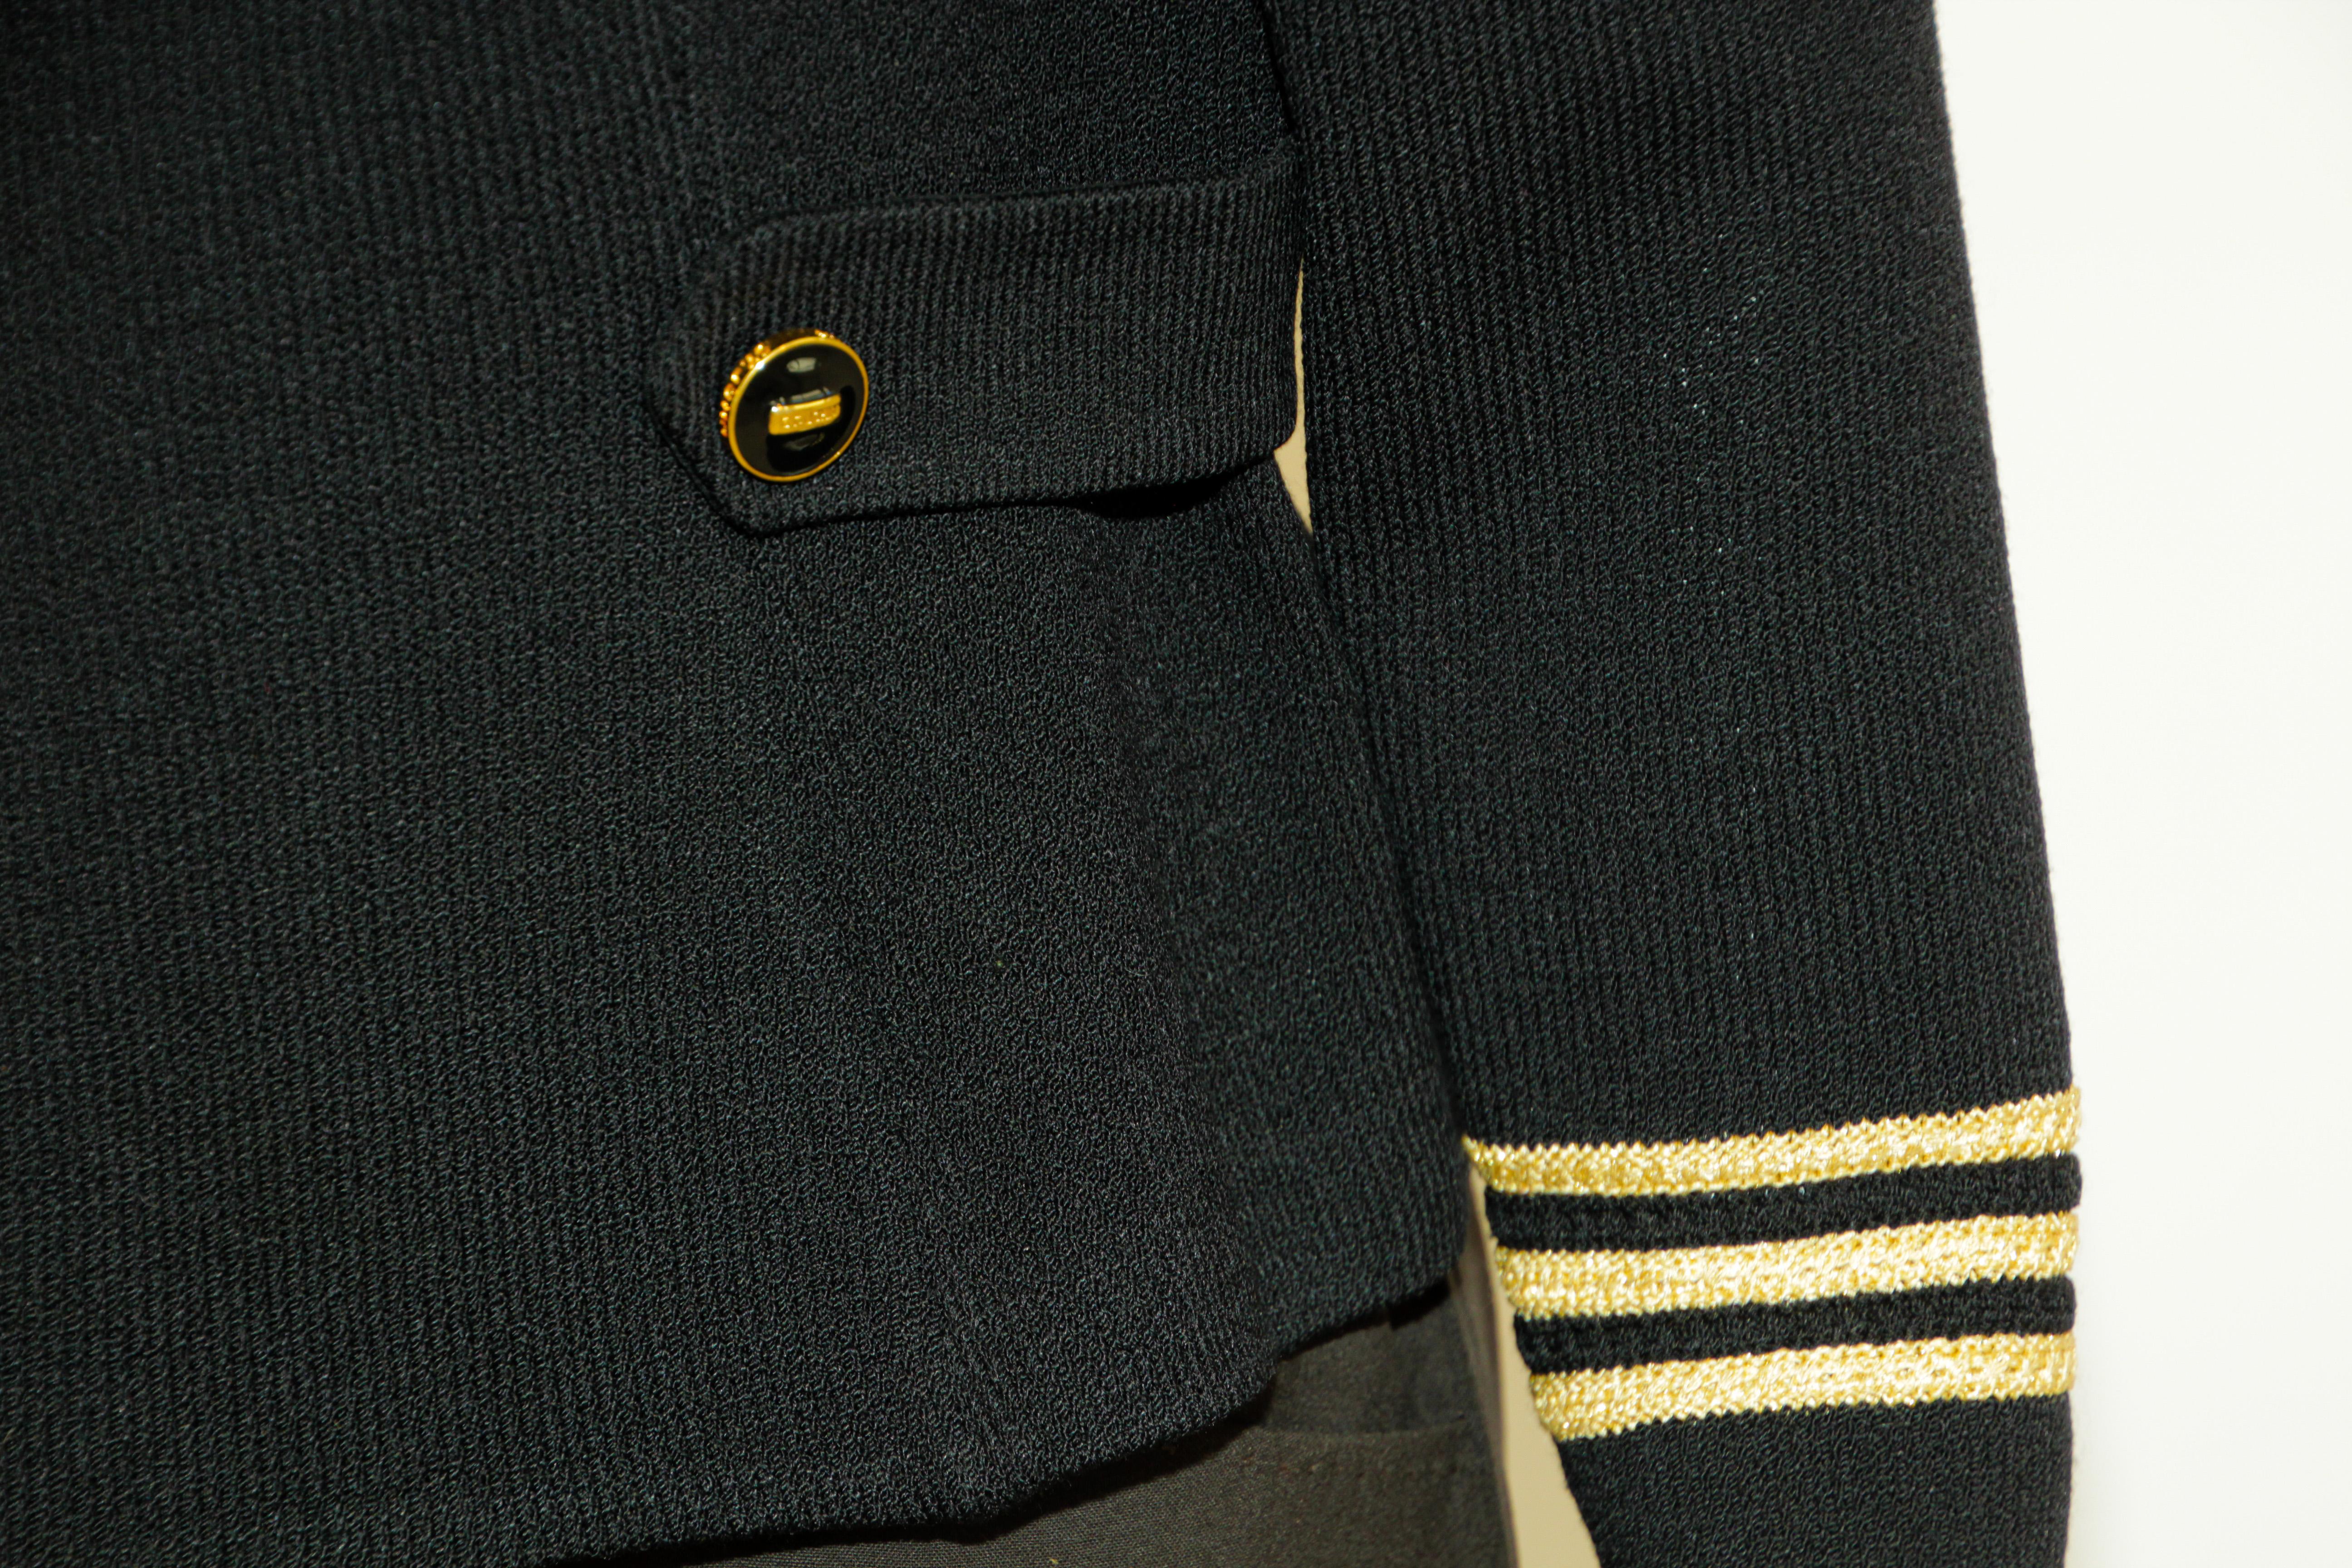 St. John Military Blazer Knit Jacket 1990's Black and Gold In Good Condition For Sale In North Hollywood, CA